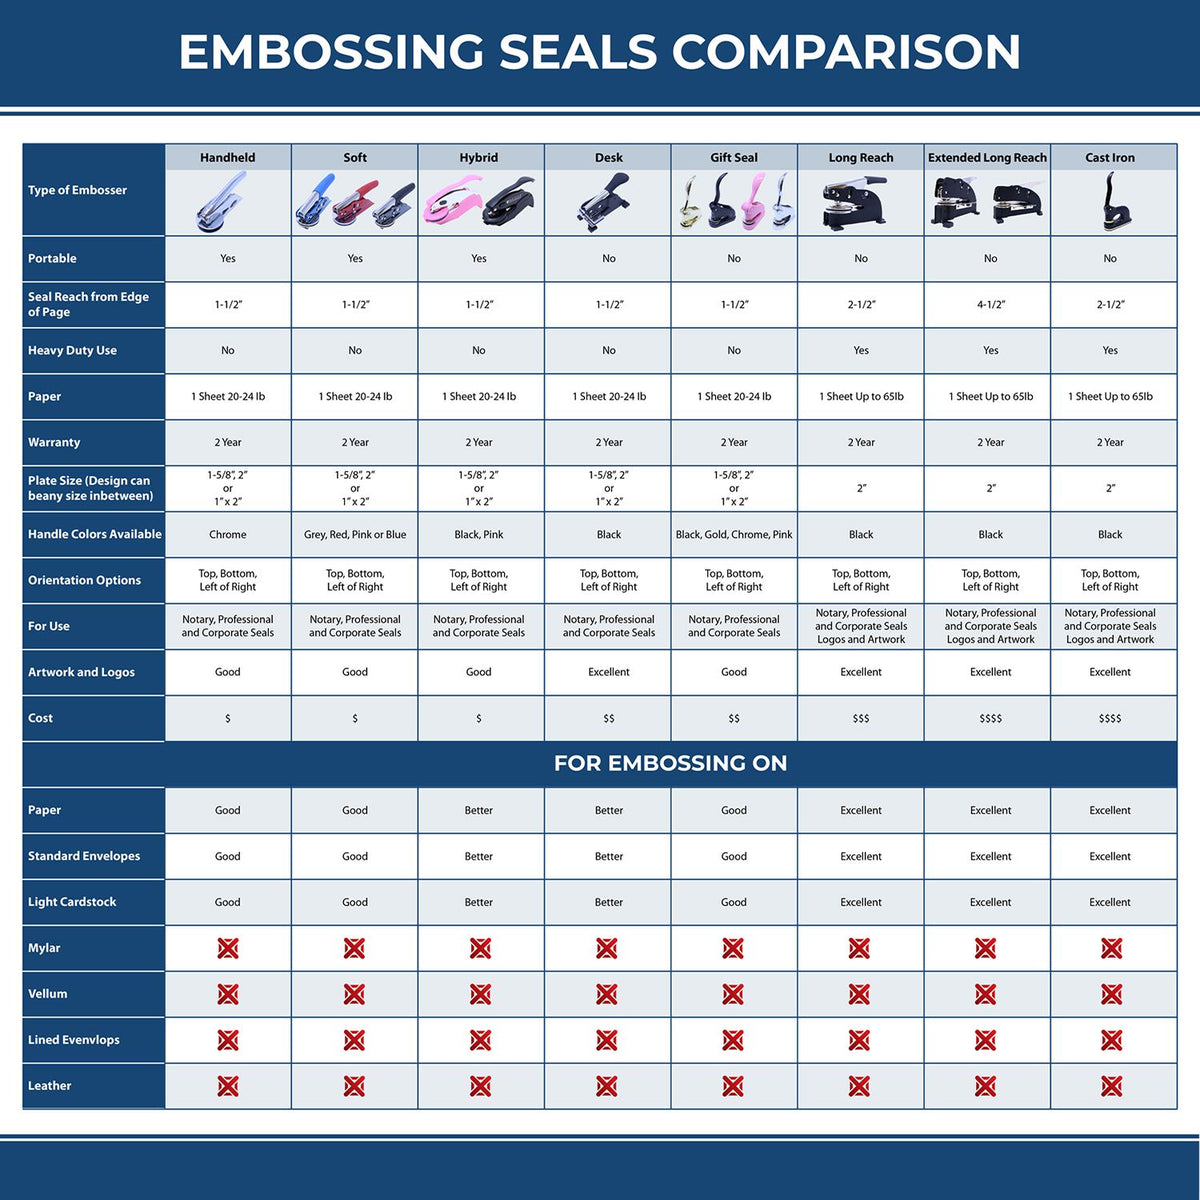 A comparison chart for the different types of mount models available for the Hybrid Pennsylvania Geologist Seal